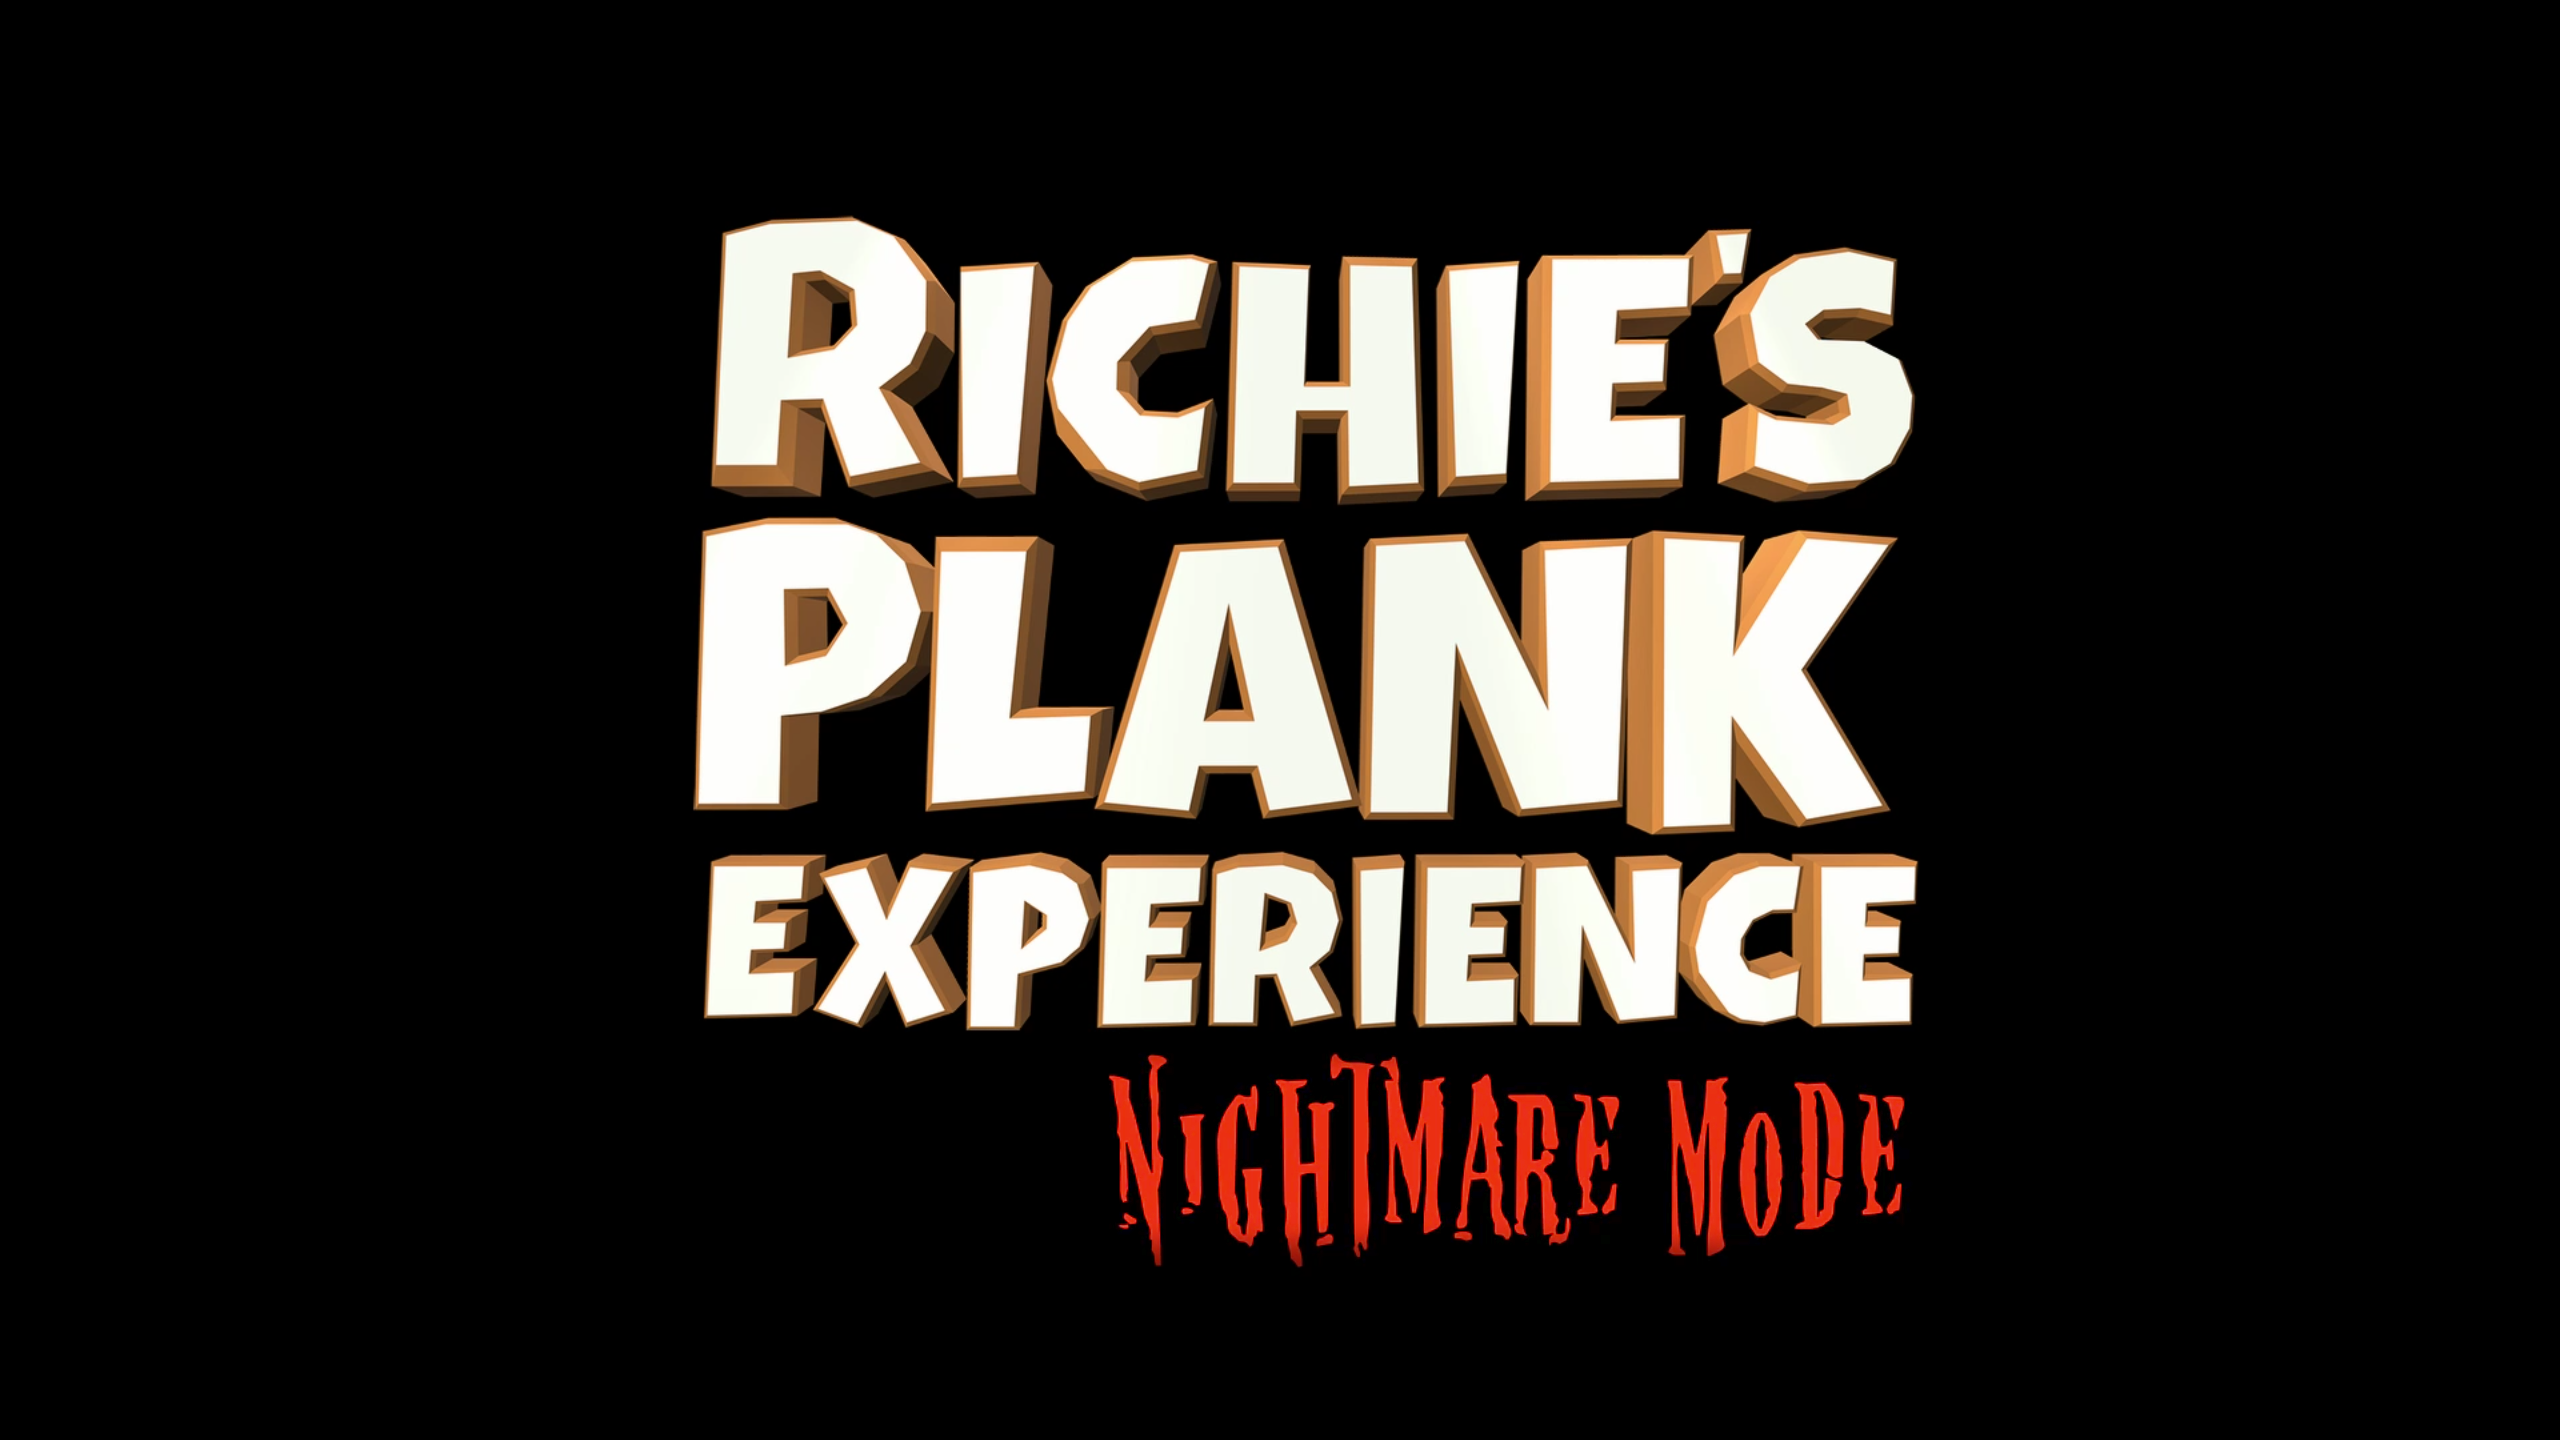 Richie's Plank. Richie's Plank experience. Plank experience VR. Richie Plank experience.